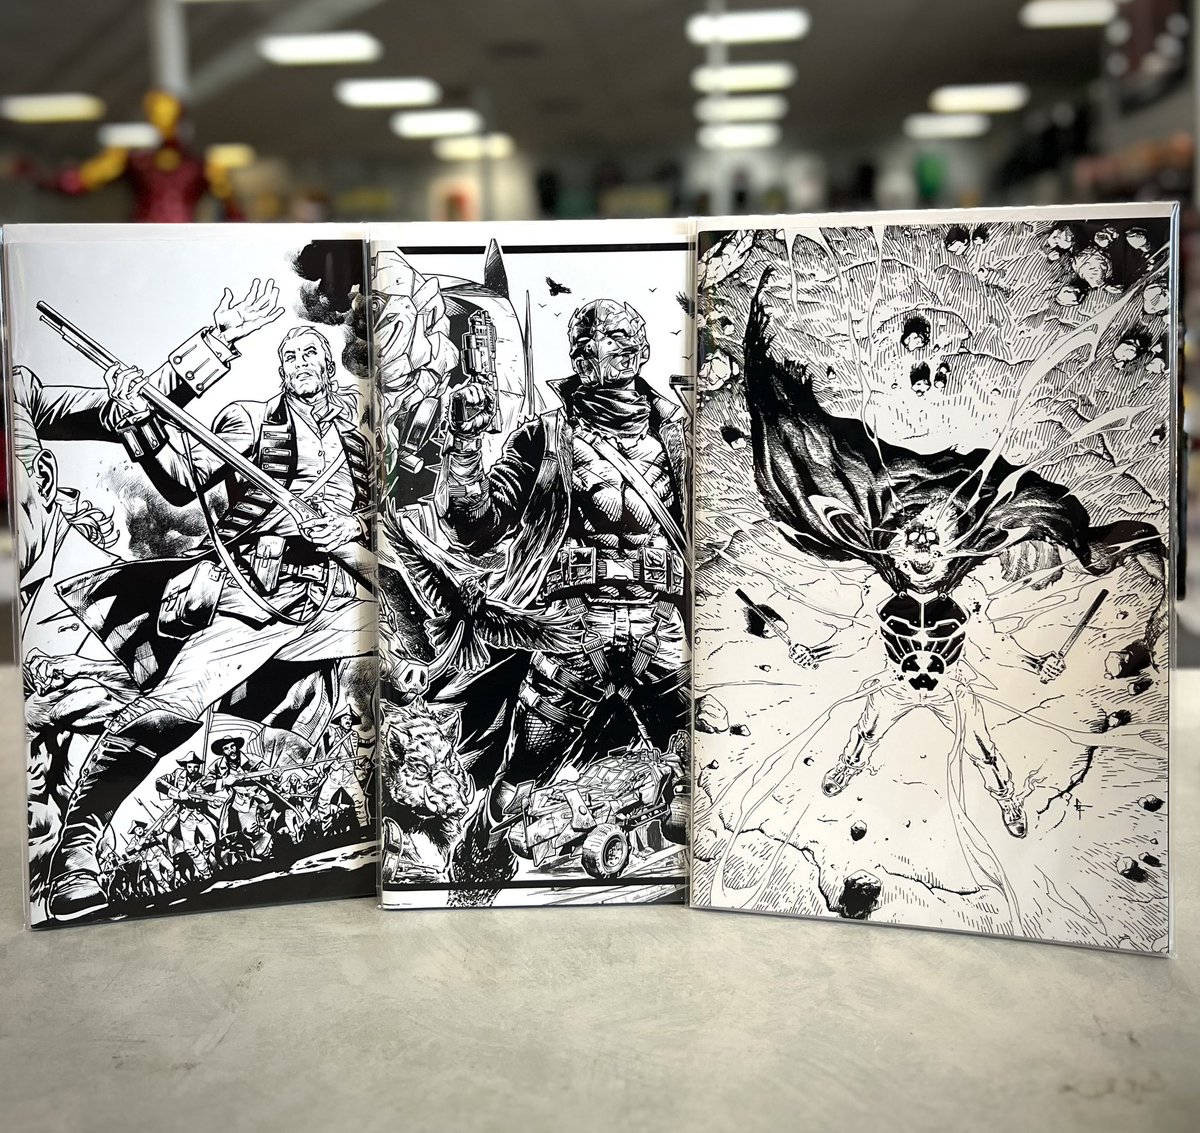 Surprise last-minute additions to tonight's Live Show- 1:500 variants for Geiger, Redcoat, and Rook: Exodus!